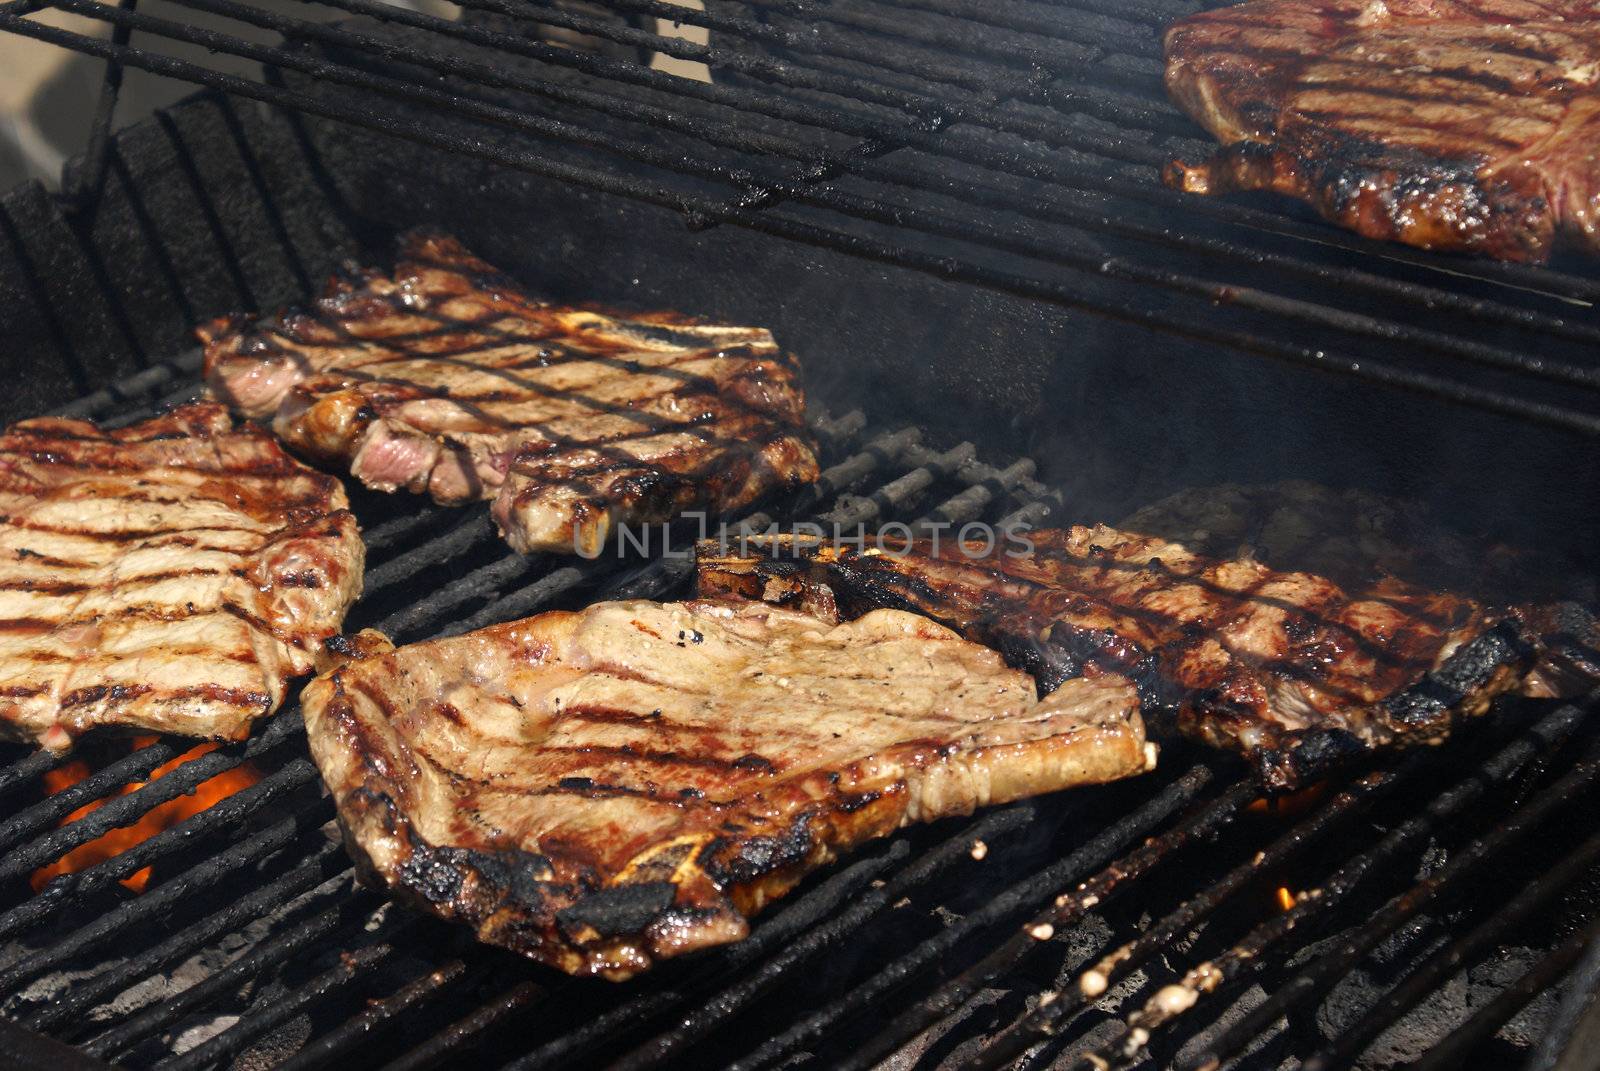 Several rib steaks grilling on the BBQ.